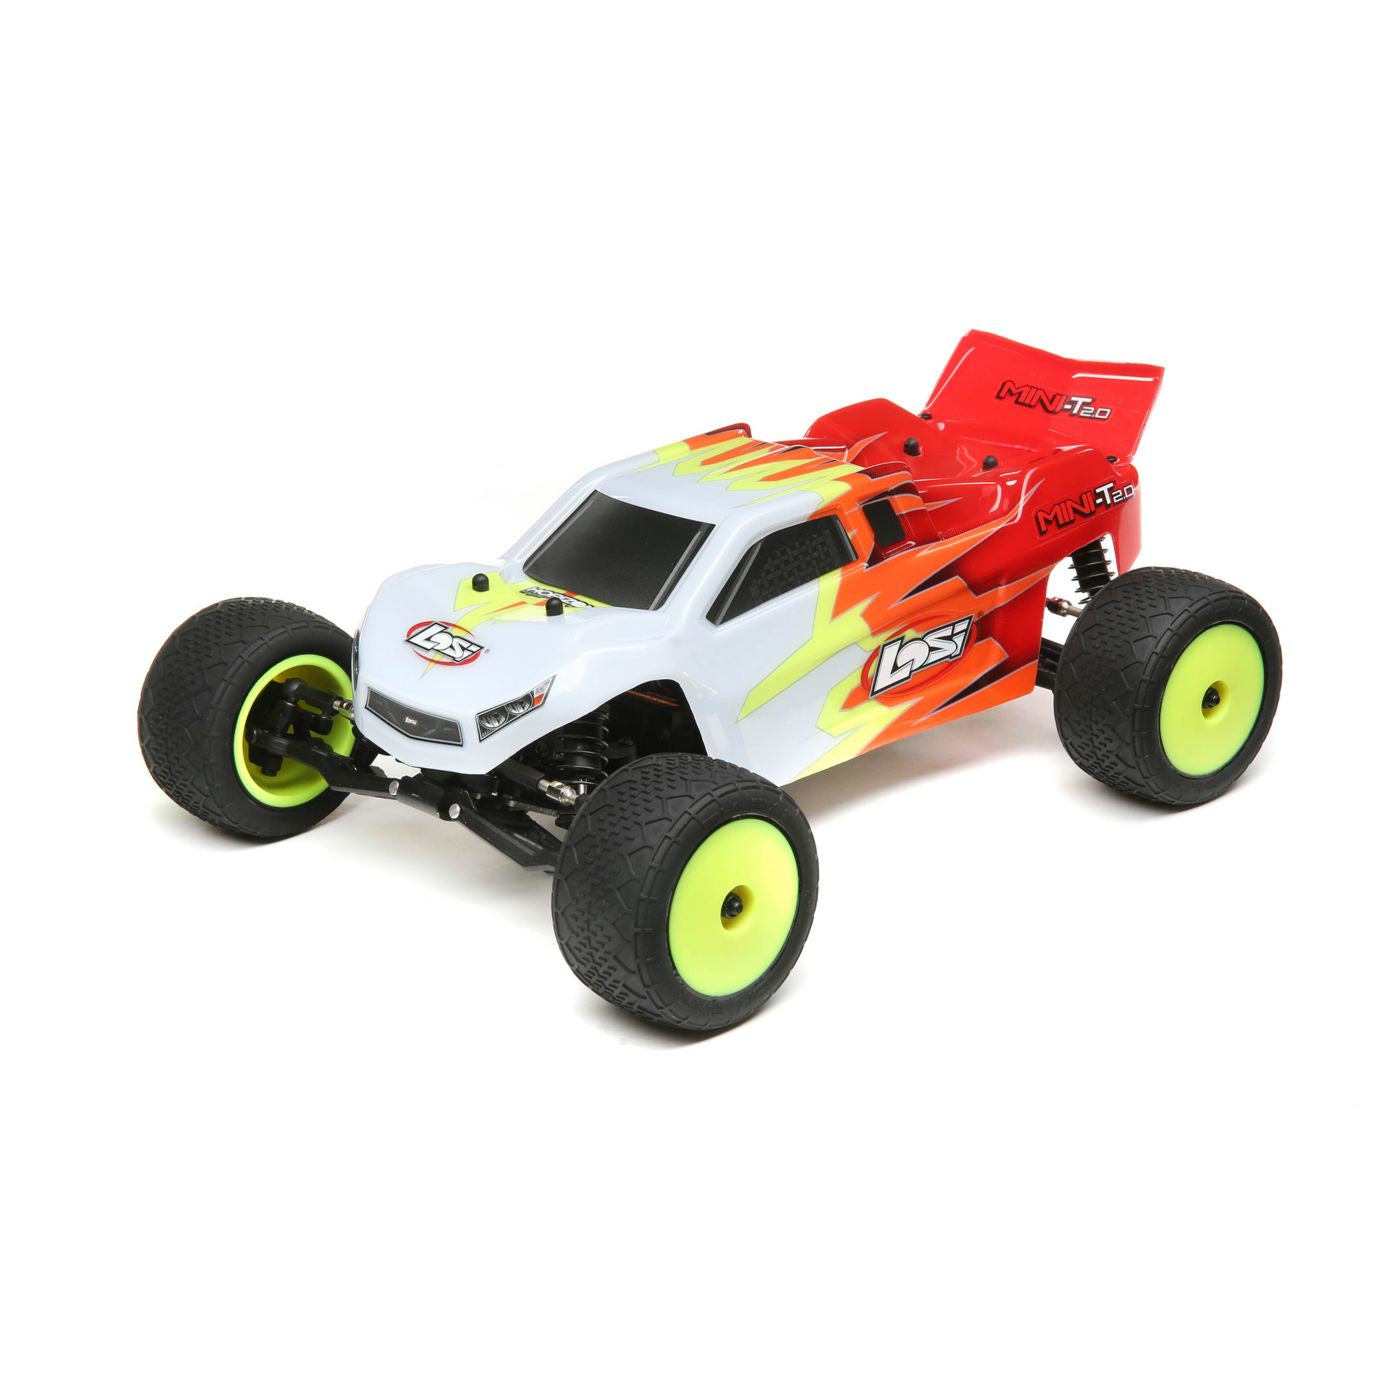 Losi 1/18 2WD Stadium Truck RTR Brushed Mini-T 2.0 - Red/White LOS01015T1